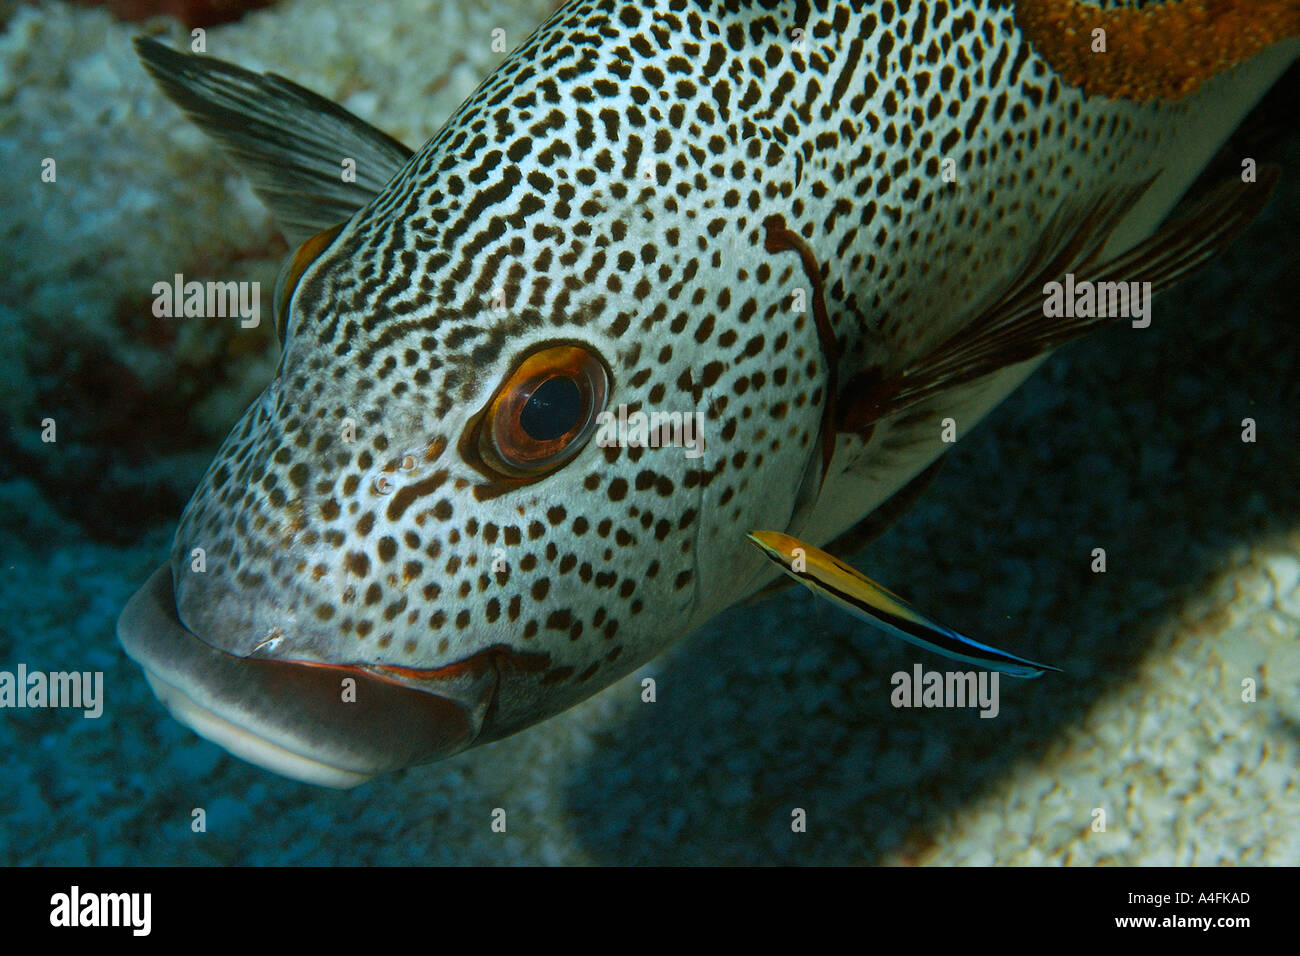 Dotted sweetlips Plectorhinchus picus being cleaned by bluestreak cleaner wrasse Labroides dimidiatus Namu atoll Marshall I Stock Photo